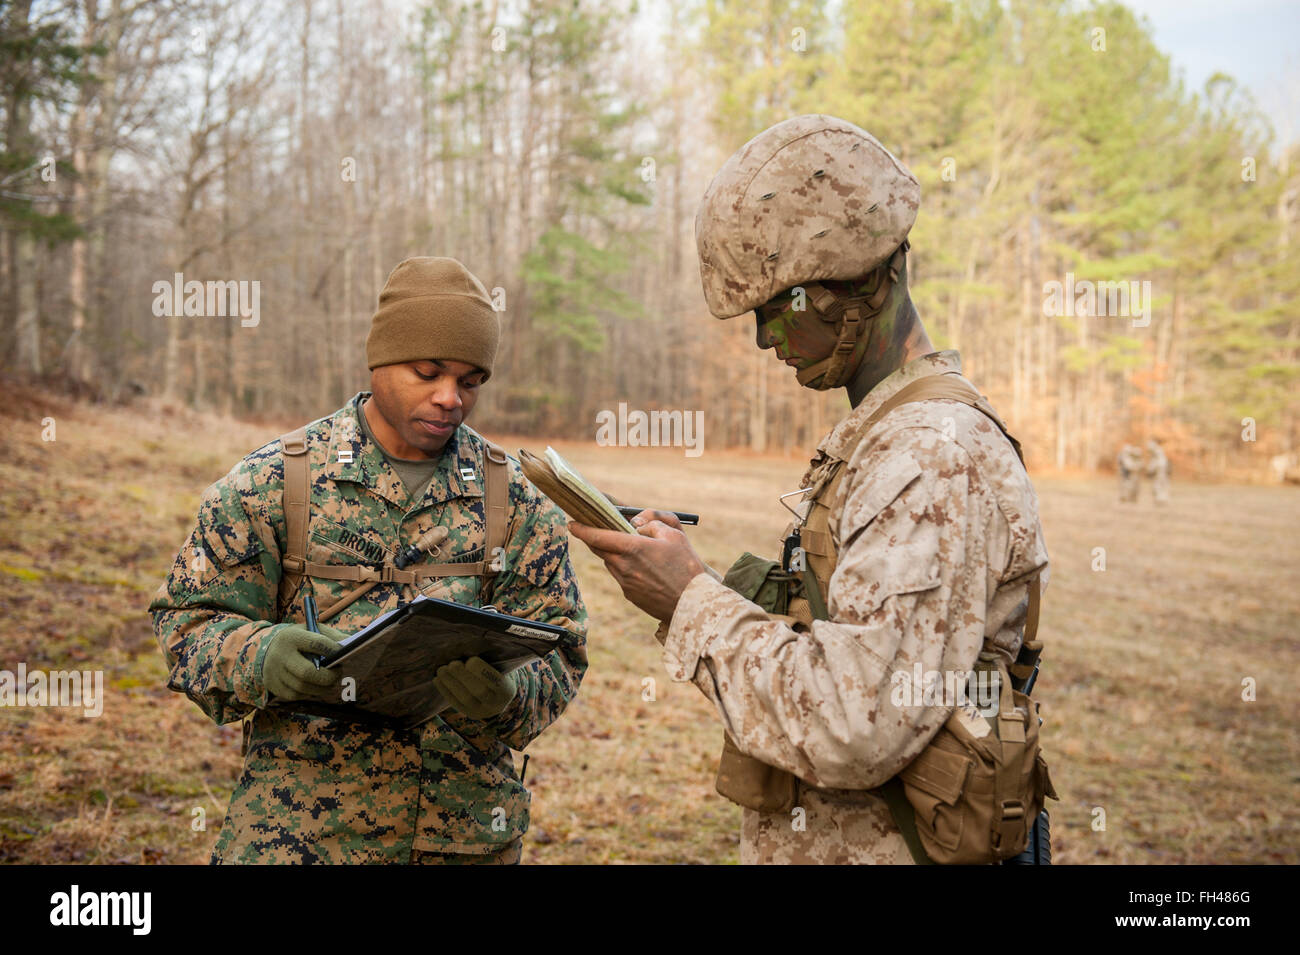 Candidates assigned to Delta Company, Officer Candidates Class-221, are evaluated as members of a fire team during the Small Unit Leadership Evaluation 1 at Brown Field, Marine Corps Base Quantico, Va., on Feb. 22, 2016. The mission of Officer Candidates School (OCS) is to 'educate and train officer candidates in Marine Corps knowledge and skills within a controlled, challenging, and chaotic environment in order to evaluate and screen individuals for the leadership, moral, mental, and physical qualities required for commissioning as a Marine Corps officer.' Stock Photo